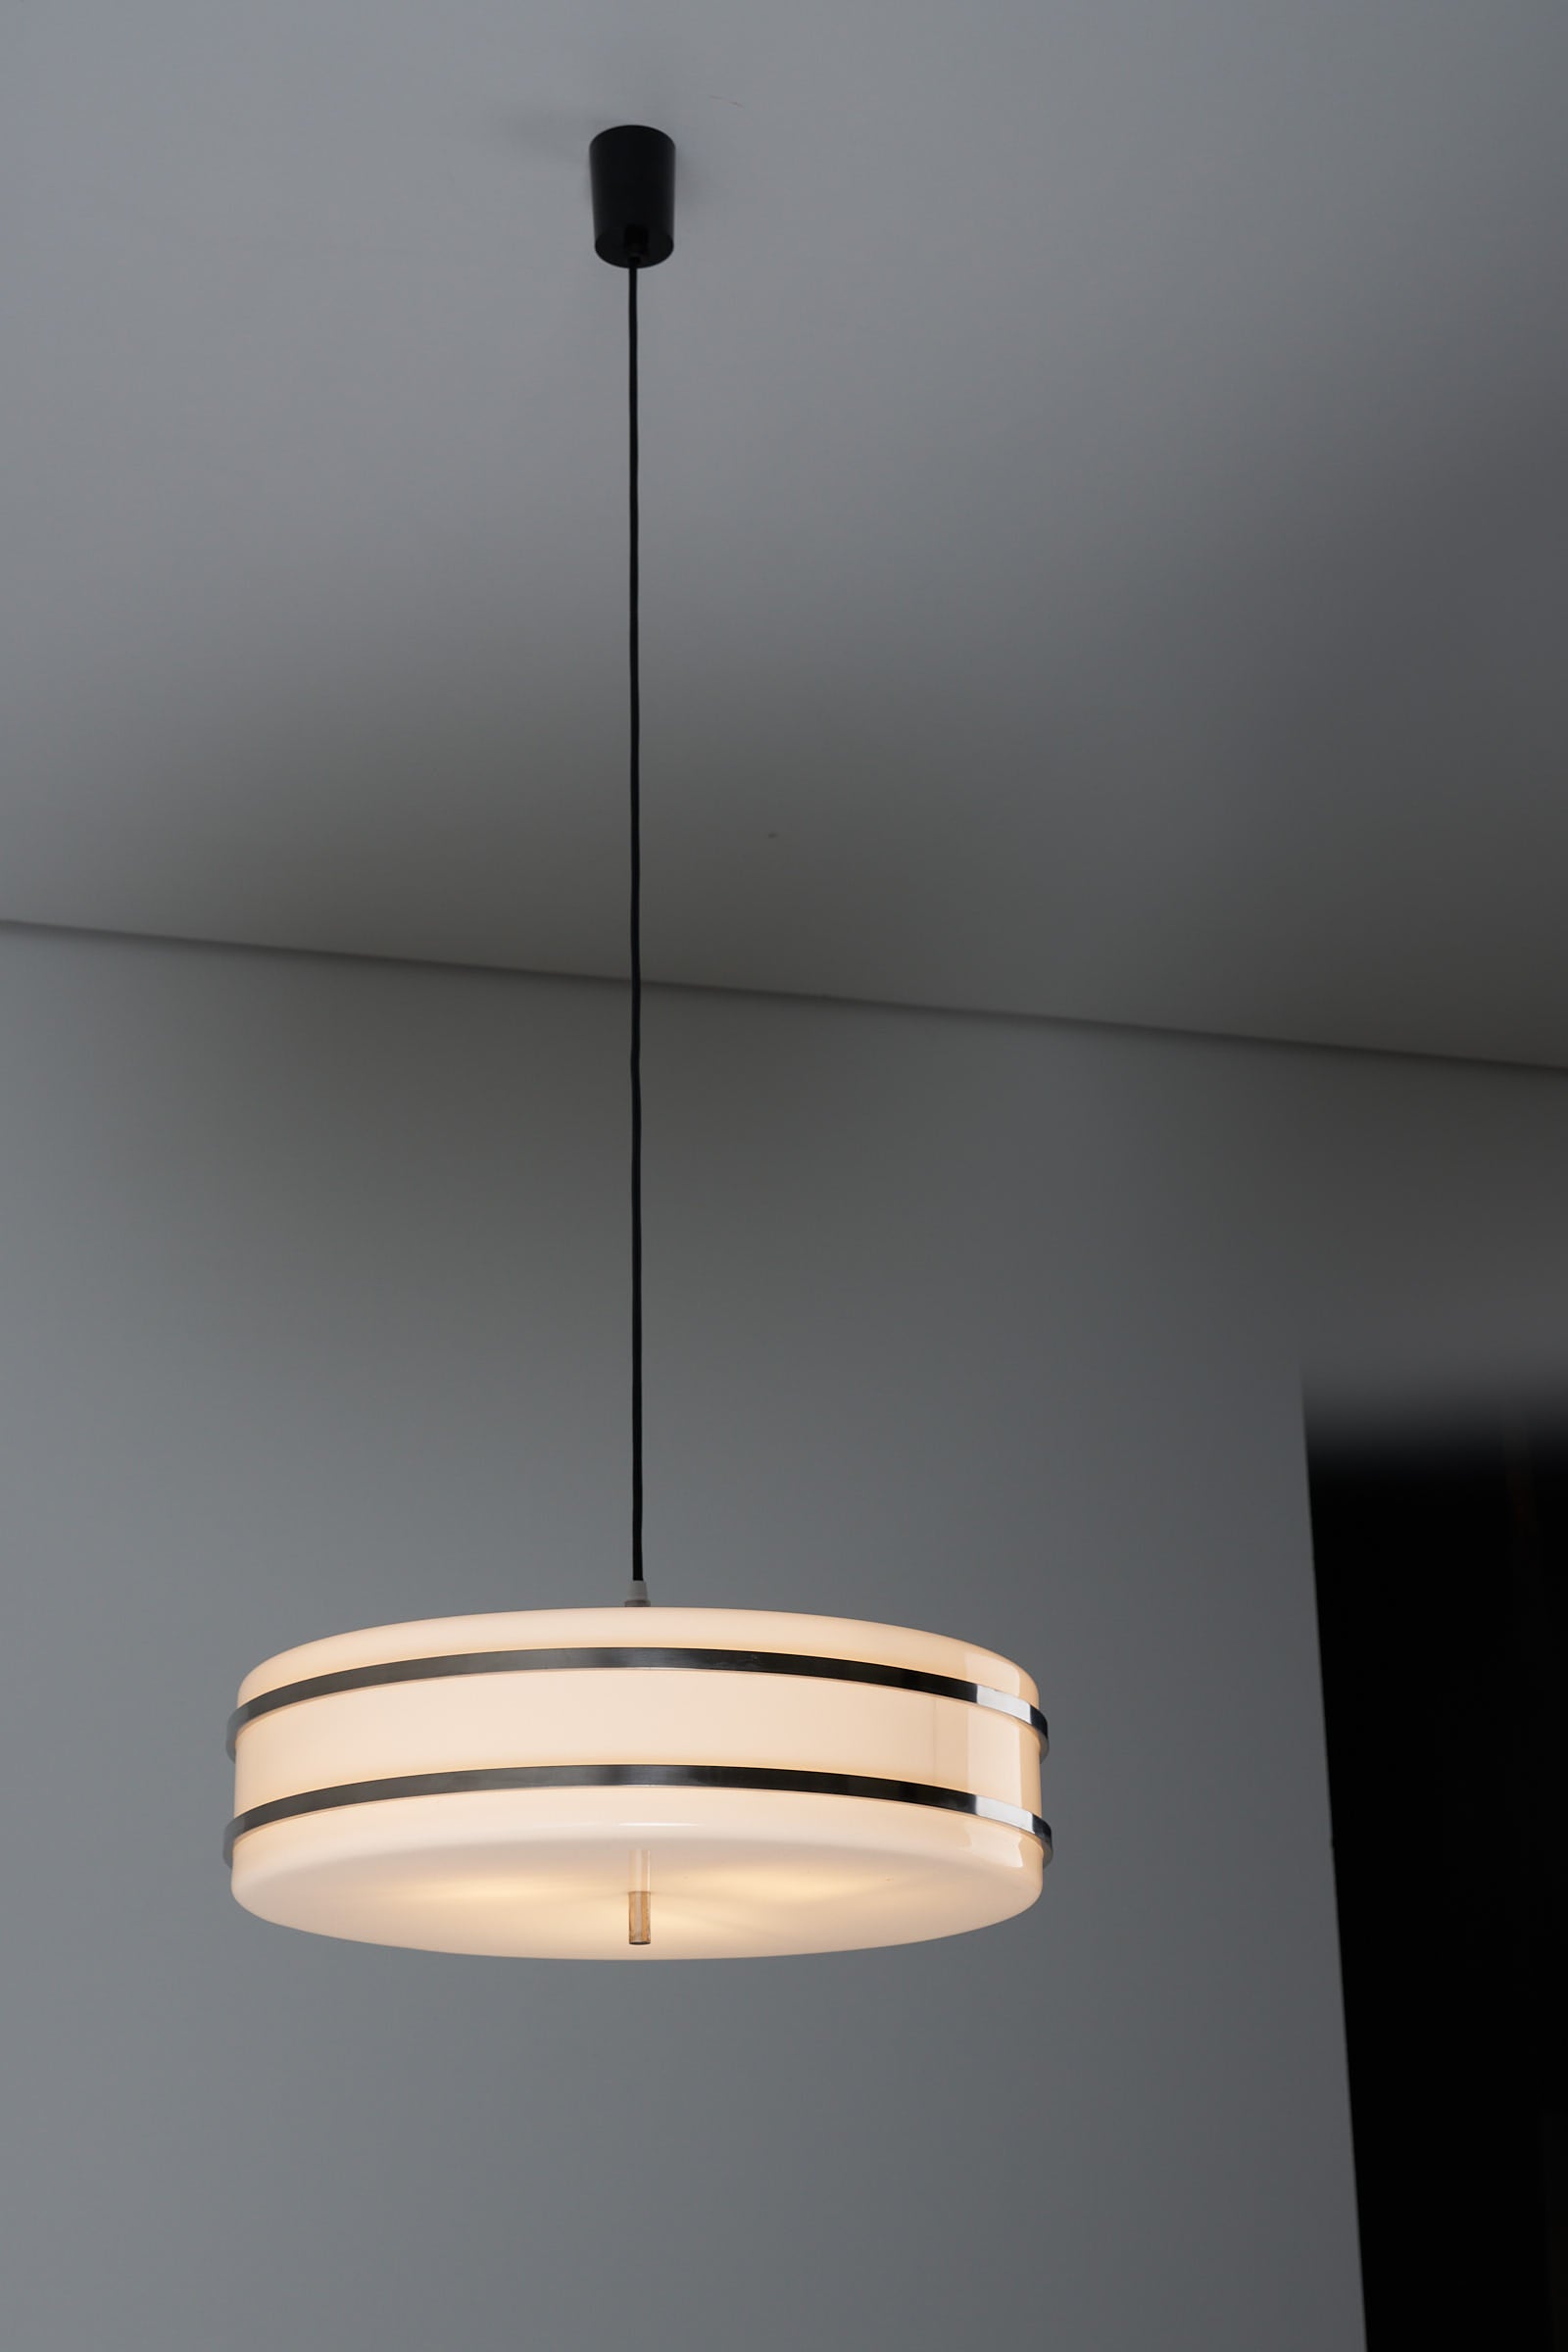 Circular pendant light by Stilux Milano with a flat cylindrical plexiglass form, chromed steel accents, and a repainted black exterior.